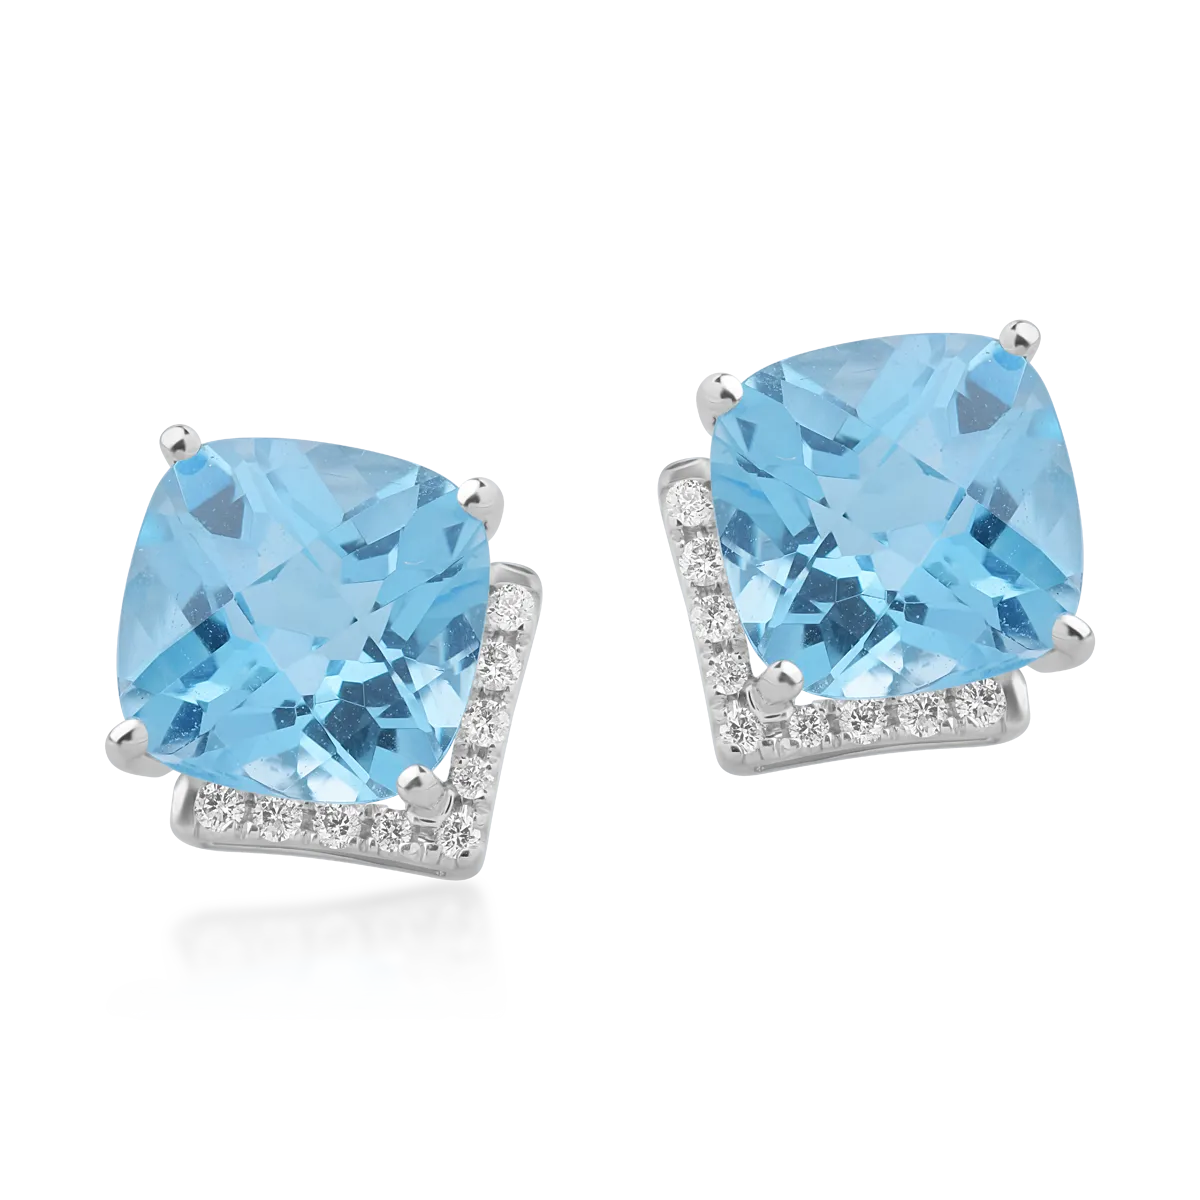 18K white gold earrings with 5ct blue topaz and 0.1ct diamonds